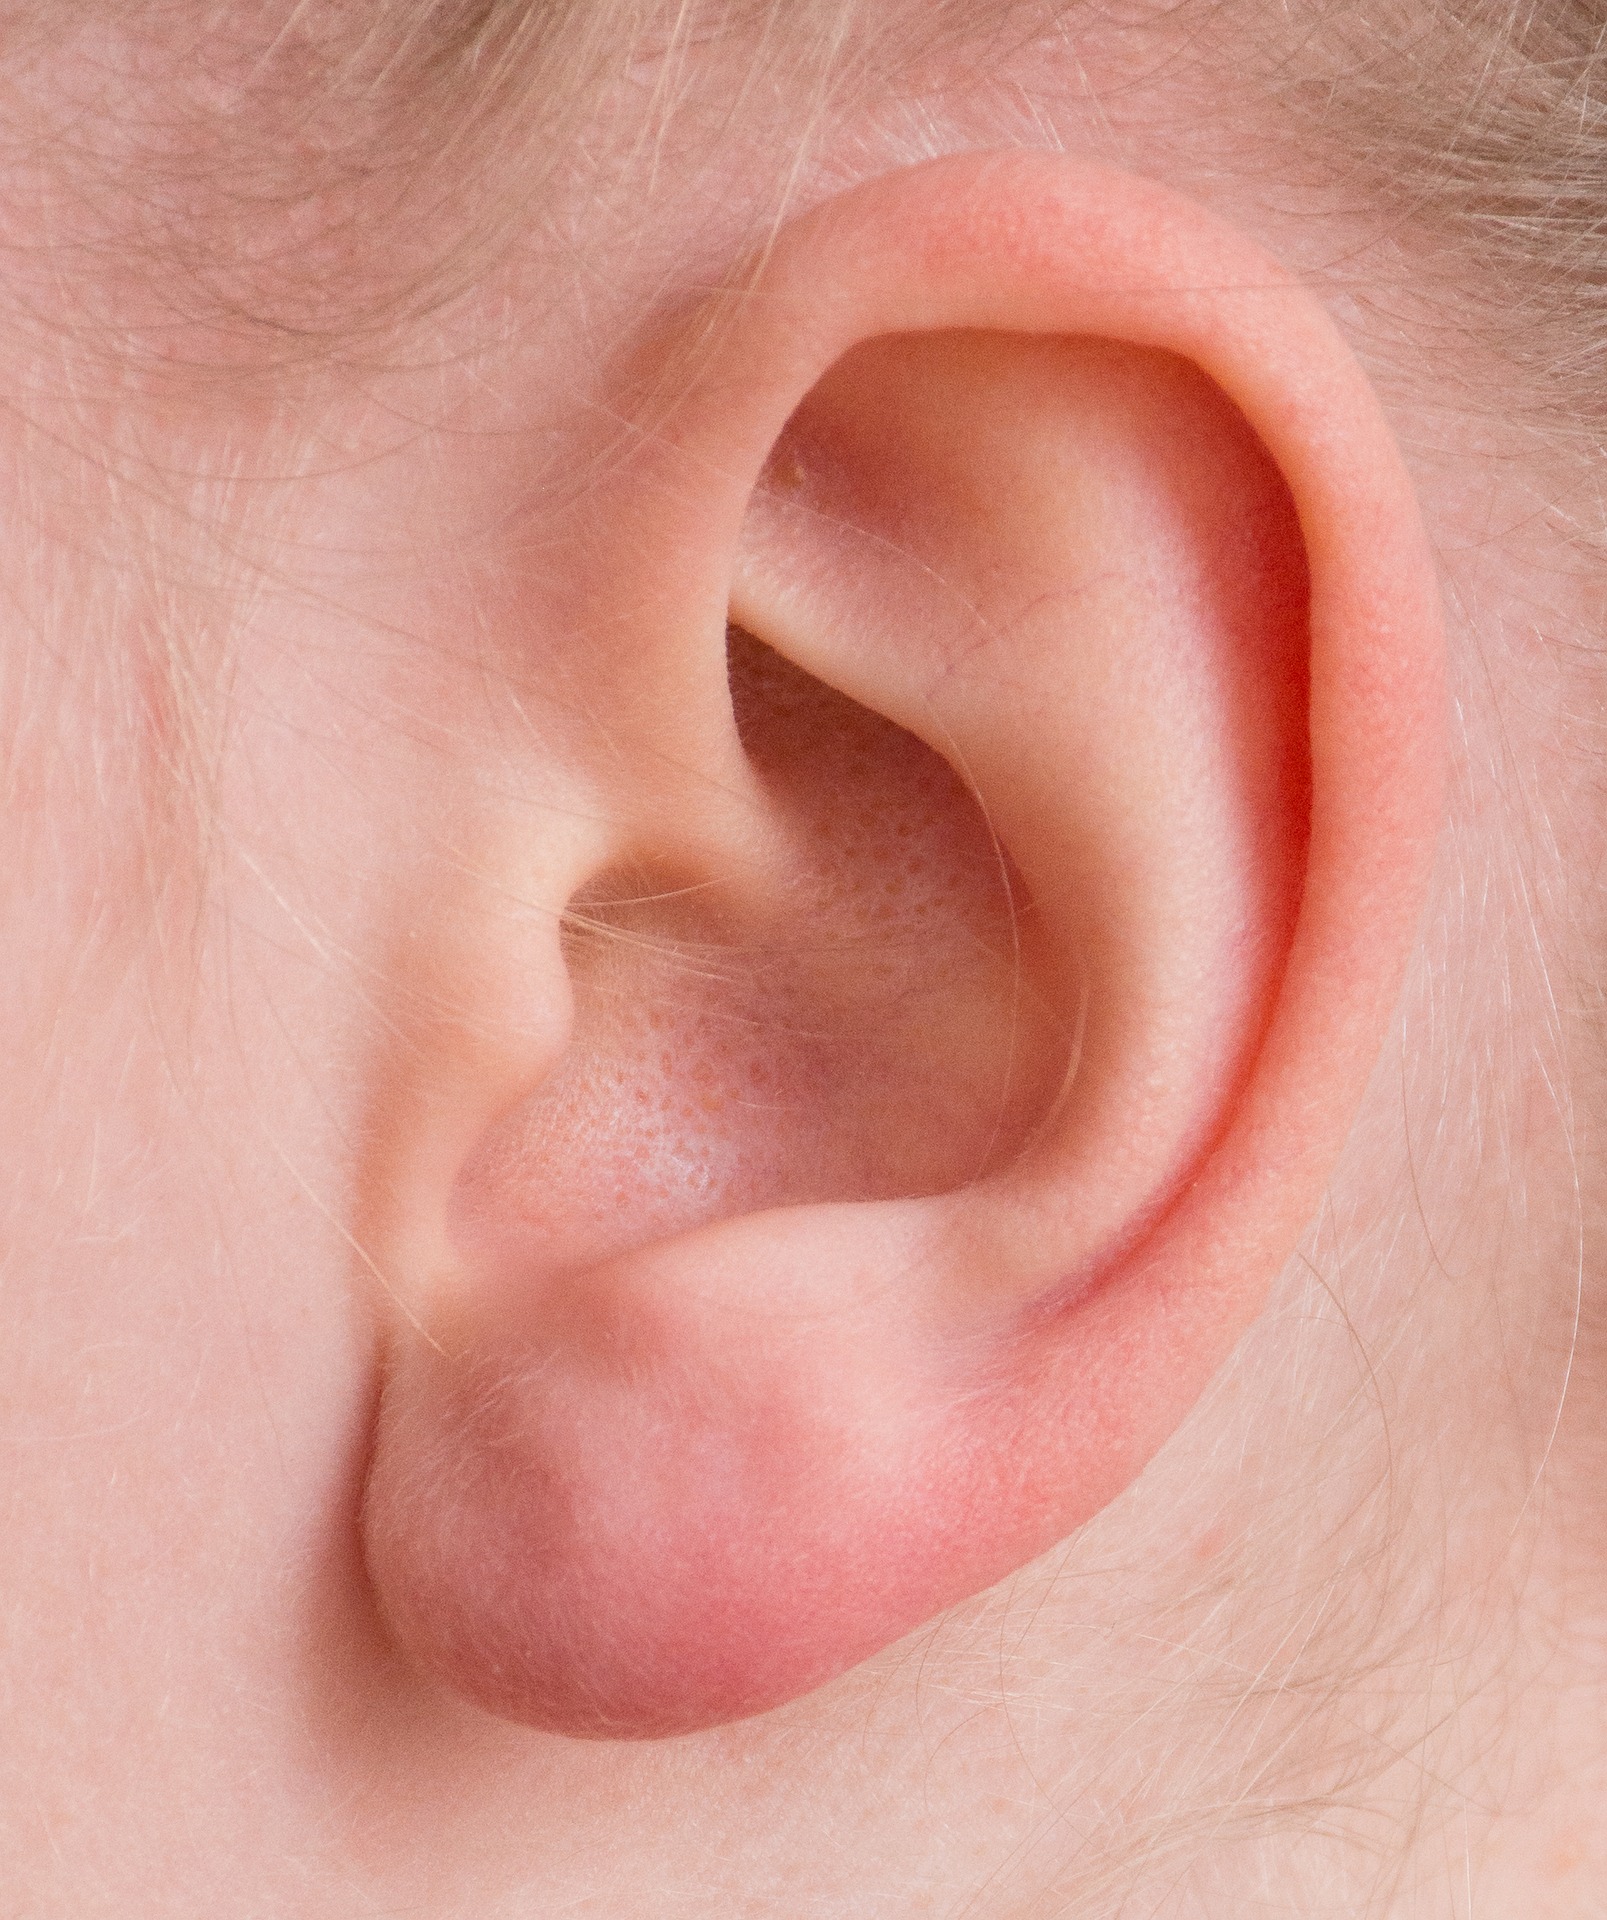 5 Ways To Improve Your Hearing